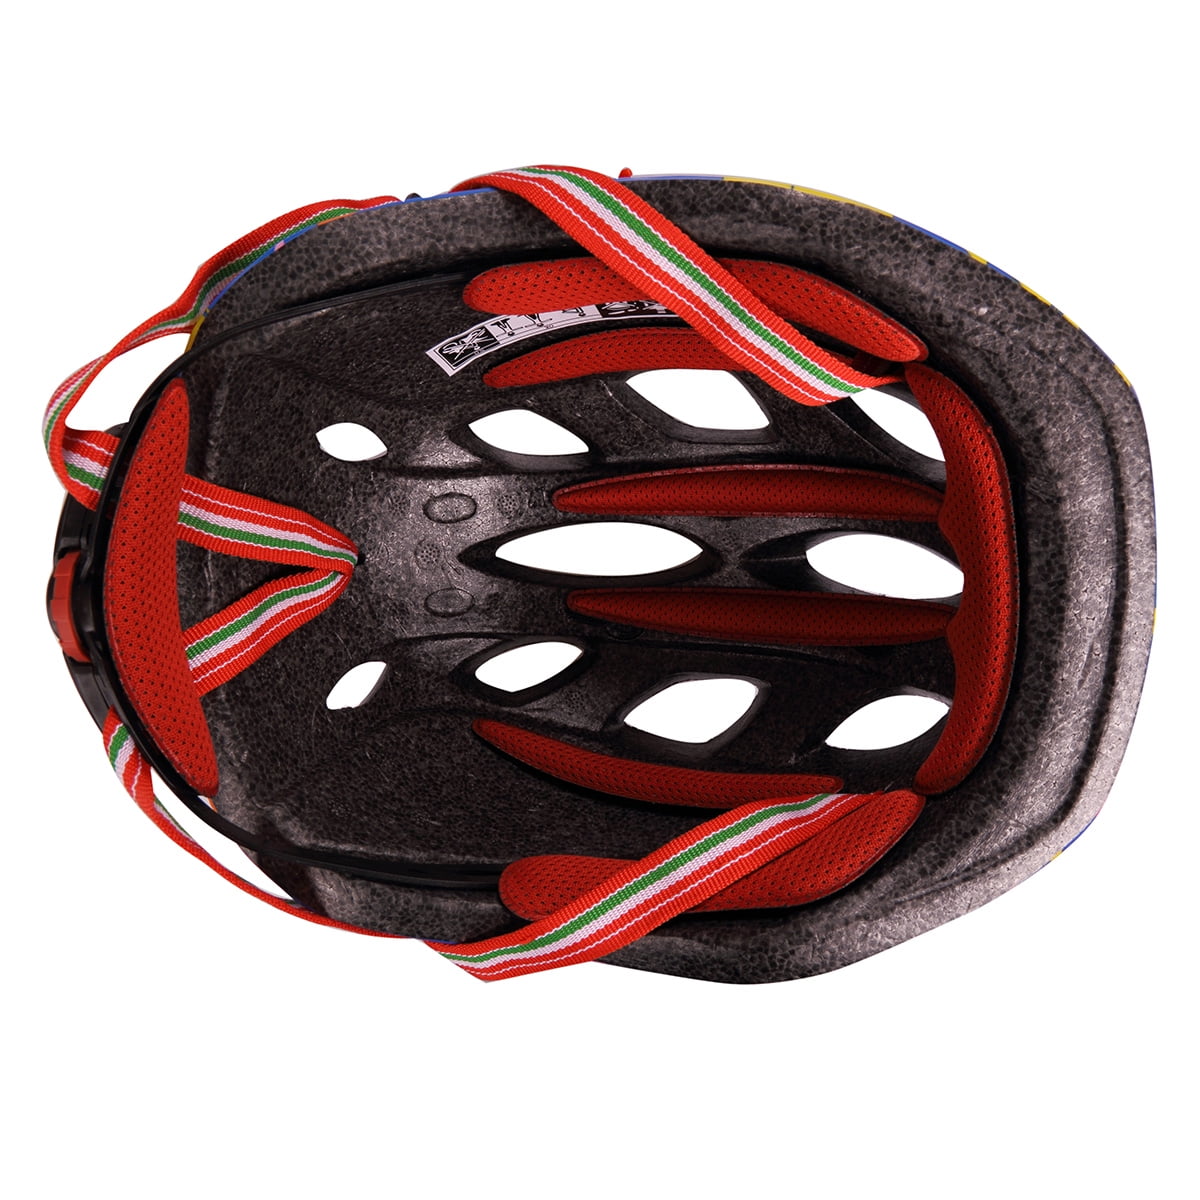 SymbolLife Kids Cycling Helmet with Adjustable Headband for a Safer Fit an Ideal First Helmet